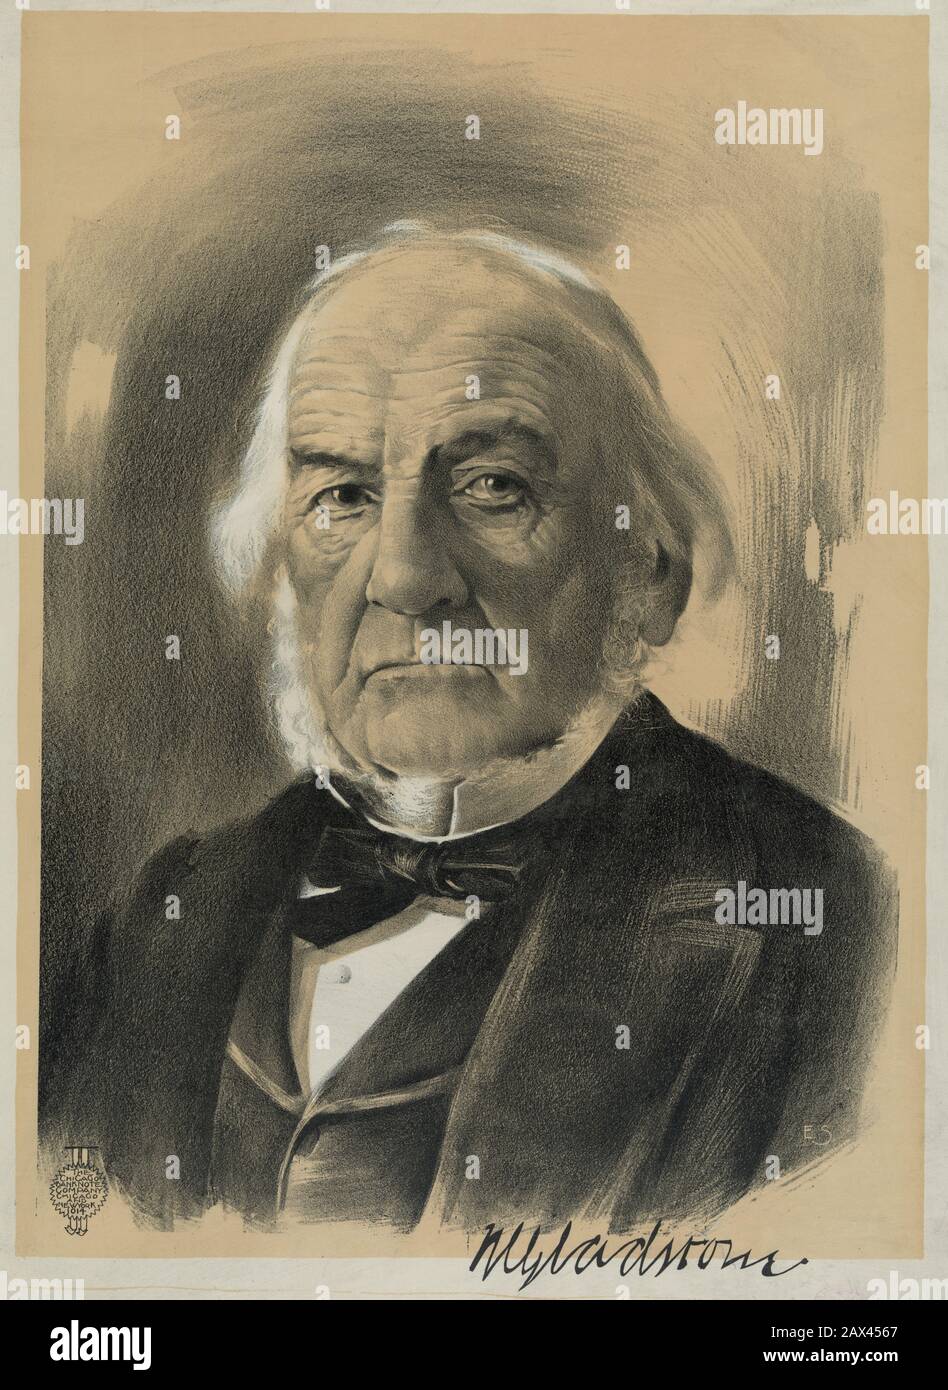 Sir William Ewart Gladstone ( 1809 –  1898 ) was a British Liberal statesman. In a career lasting over sixty years, he served as Prime Minister four separate times more than any other person. Gladstone was also Britain's oldest Prime Minister, 84 years old when he resigned for the last time. He had also served as Chancellor of the Exchequer four times (1853–1855, 1859–1866, 1873–1874, and 1880–1882) . Envraved print from 1893 , Chicago Banknote company and New York , USA -  GRAND BRETAGNA  - FOTO STORICHE - HISTORY - Primo Ministro Inglese - Epoca VITTORIANA - Queen Victoria - Victorian Hera Stock Photo